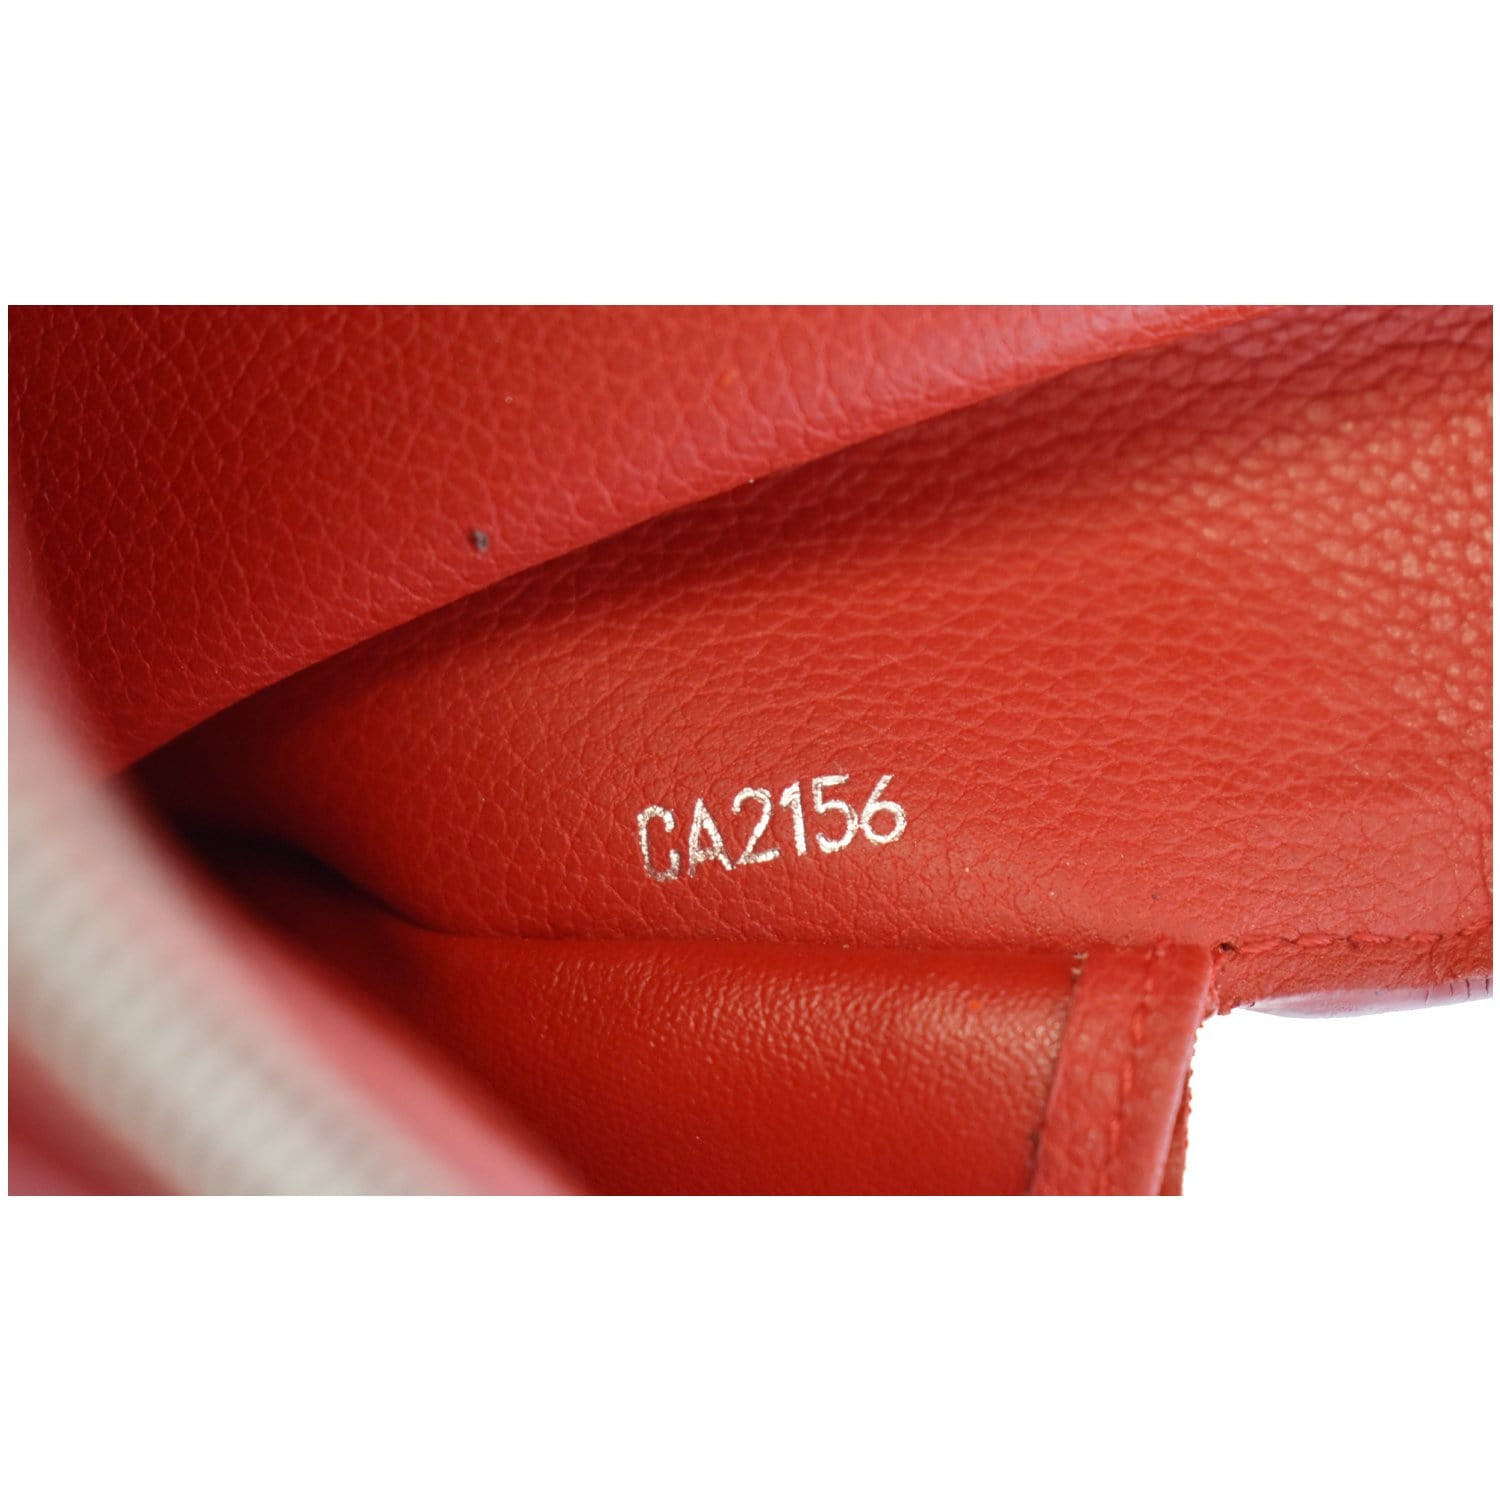 Louis Vuitton Red Leather Lockme II Wallet For Sale at 1stDibs